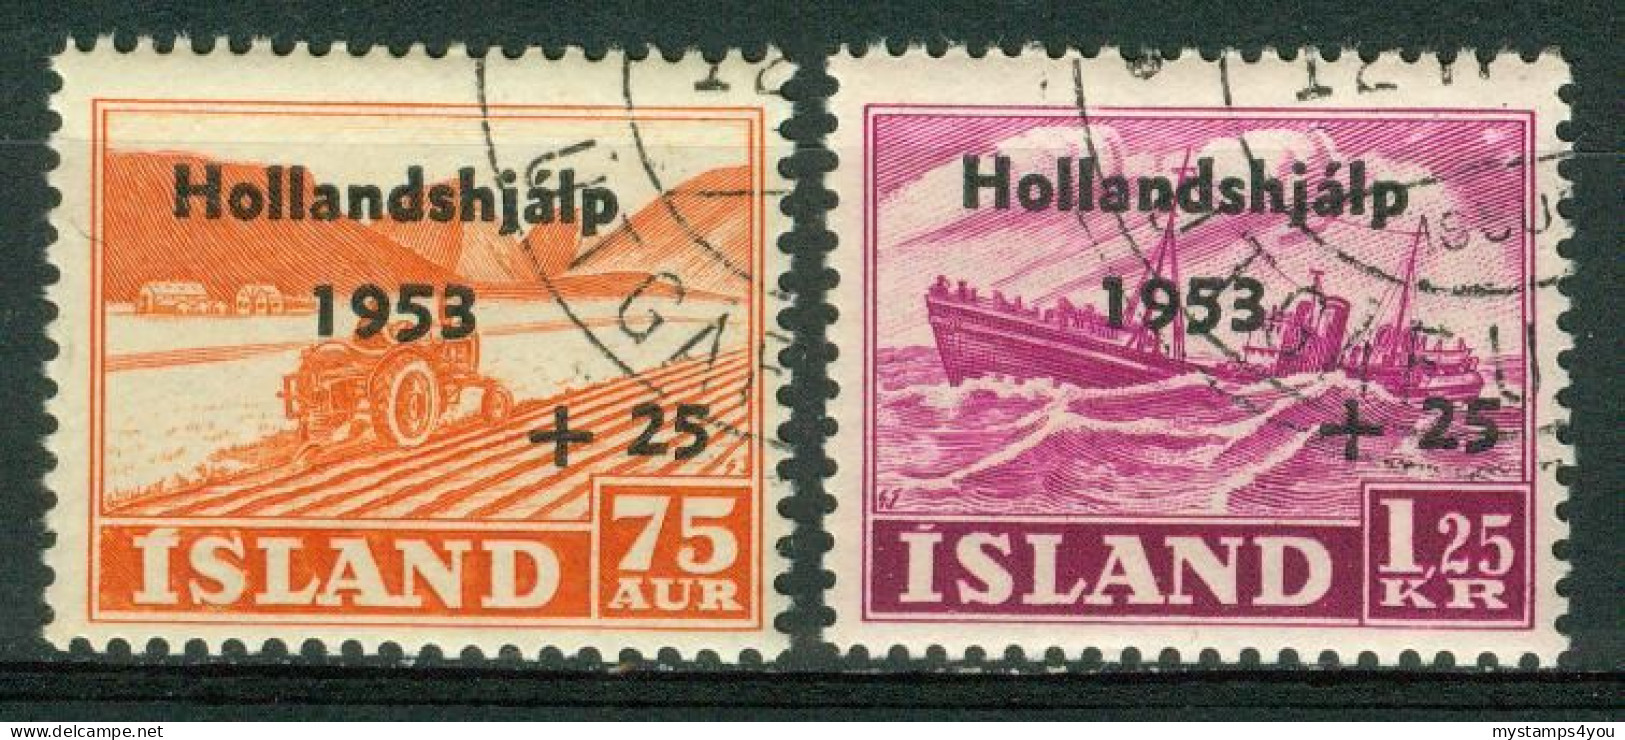 Bm Iceland 1953 MiNr 285-286 Used | Netherlands Flood Relief Fund #5-02-11 - Used Stamps